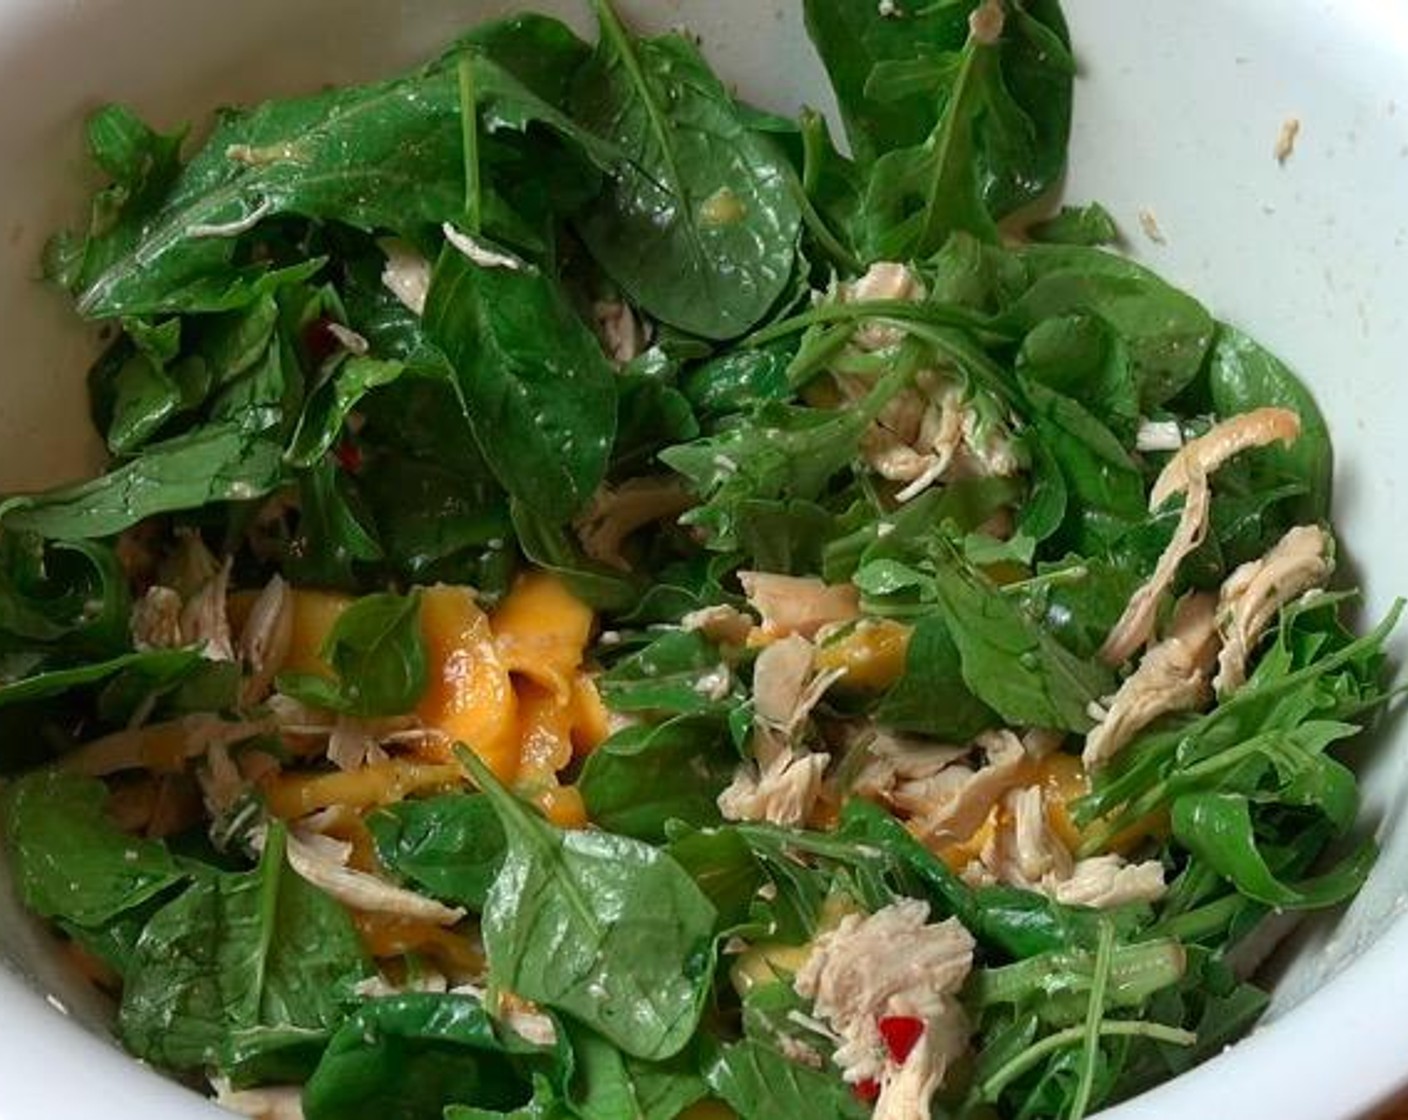 step 2 In a large mixing bowl, add Salad Greens (1 1/3 cups), Chicken Breasts (2 cups) and Mangoes (2). Drizzle dressing over top. Gently toss everything together to combine and season with Freshly Ground Black Pepper (to taste).